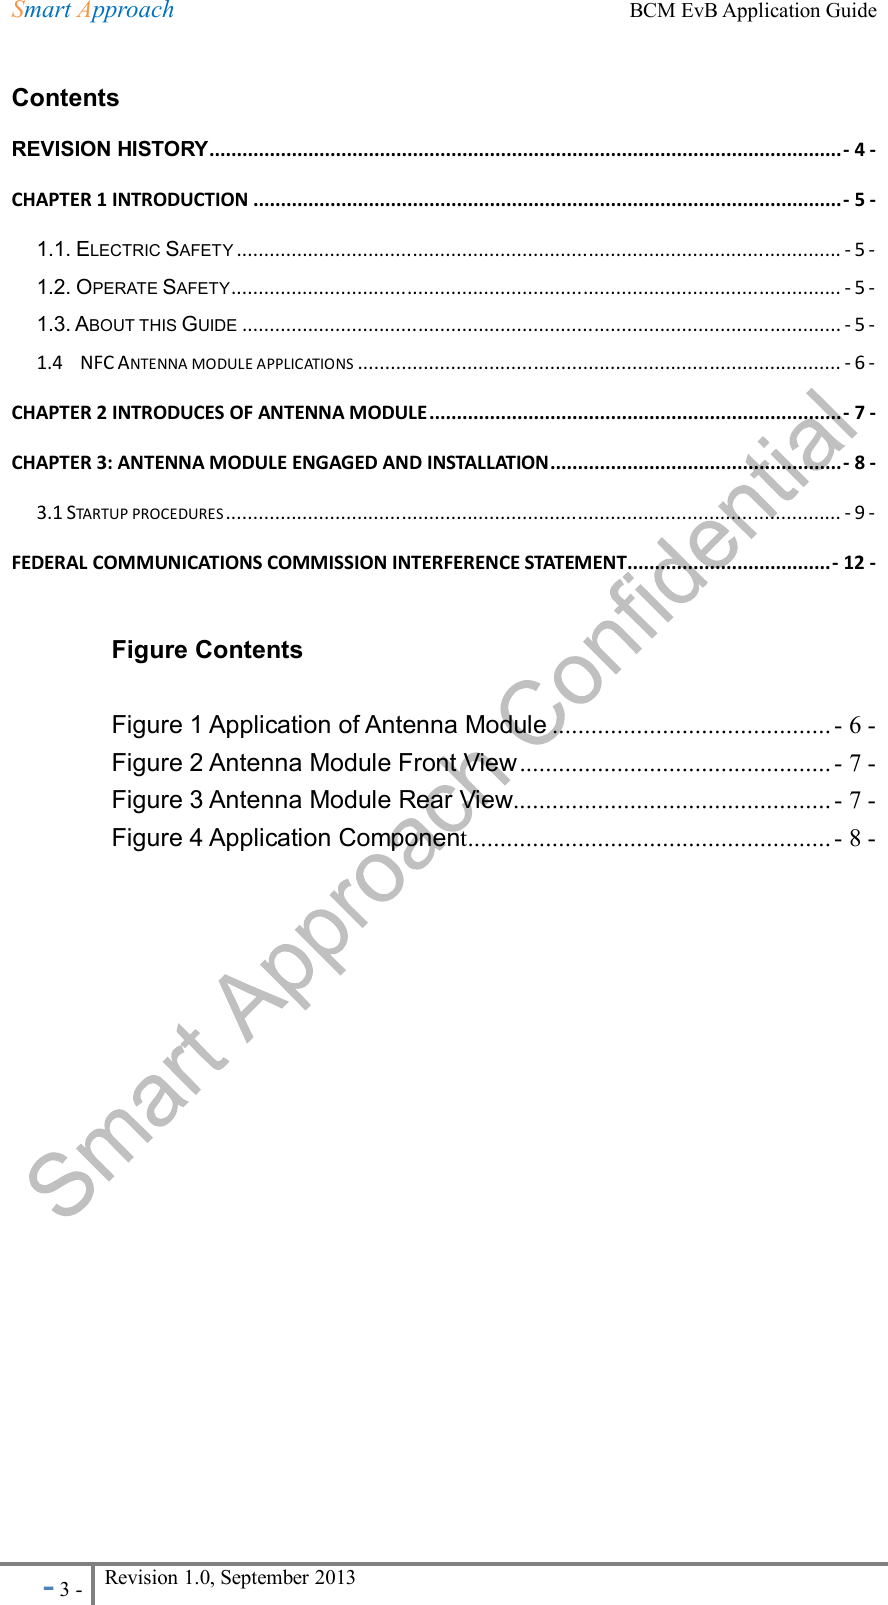 Smart Approach    BCM EvB Application Guide - 3 - Revision 1.0, September 2013                                                             Contents REVISION HISTORY ................................................................................................................... - 4 - CHAPTER 1 INTRODUCTION ........................................................................................................... - 5 - 1.1. ELECTRIC SAFETY .............................................................................................................. - 5 - 1.2. OPERATE SAFETY ............................................................................................................... - 5 - 1.3. ABOUT THIS GUIDE ............................................................................................................. - 5 - 1.4    NFC ANTENNA MODULE APPLICATIONS ........................................................................................ - 6 - CHAPTER 2 INTRODUCES OF ANTENNA MODULE ........................................................................... - 7 - CHAPTER 3: ANTENNA MODULE ENGAGED AND INSTALLATION ..................................................... - 8 - 3.1 STARTUP PROCEDURES ................................................................................................................ - 9 - FEDERAL COMMUNICATIONS COMMISSION INTERFERENCE STATEMENT ..................................... - 12 -  Figure Contents  Figure 1 Application of Antenna Module ........................................... - 6 - Figure 2 Antenna Module Front View ................................................ - 7 - Figure 3 Antenna Module Rear View ................................................. - 7 - Figure 4 Application Component ........................................................ - 8 -      